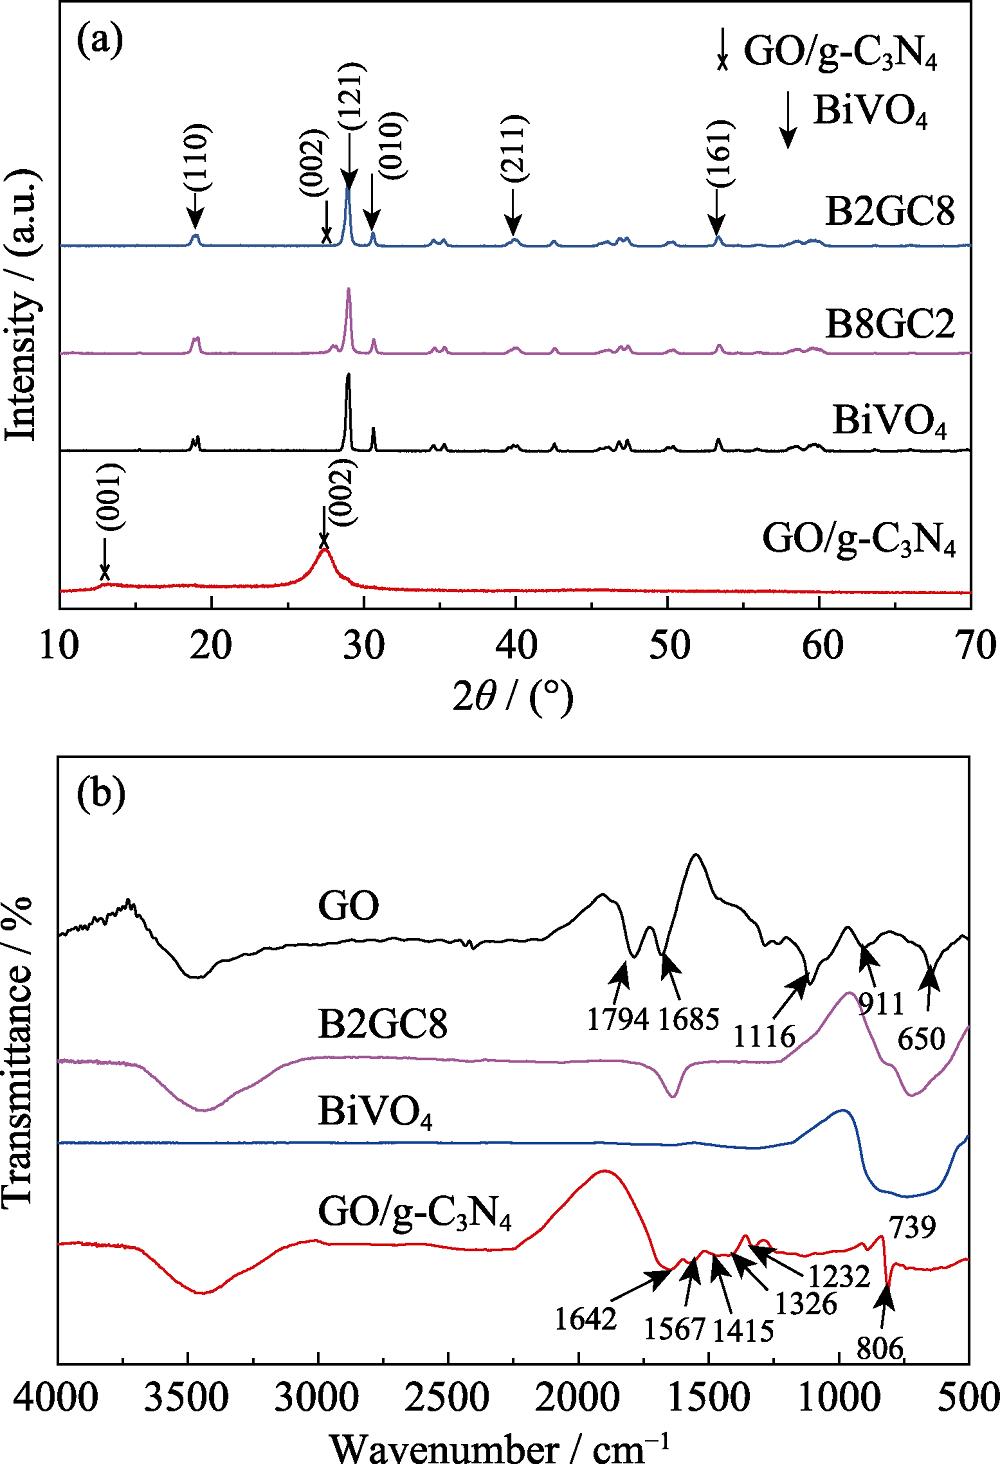 XRD patterns of BiVO4, g-C3N4/GO, B2GC8, and BiVO4/ GO/g-C3N4 (a), and FT-IR spectra of the as-prepared GO, GO/ g-C3N4, BiVO4, BiVO4/GO/g-C3N4 (b)